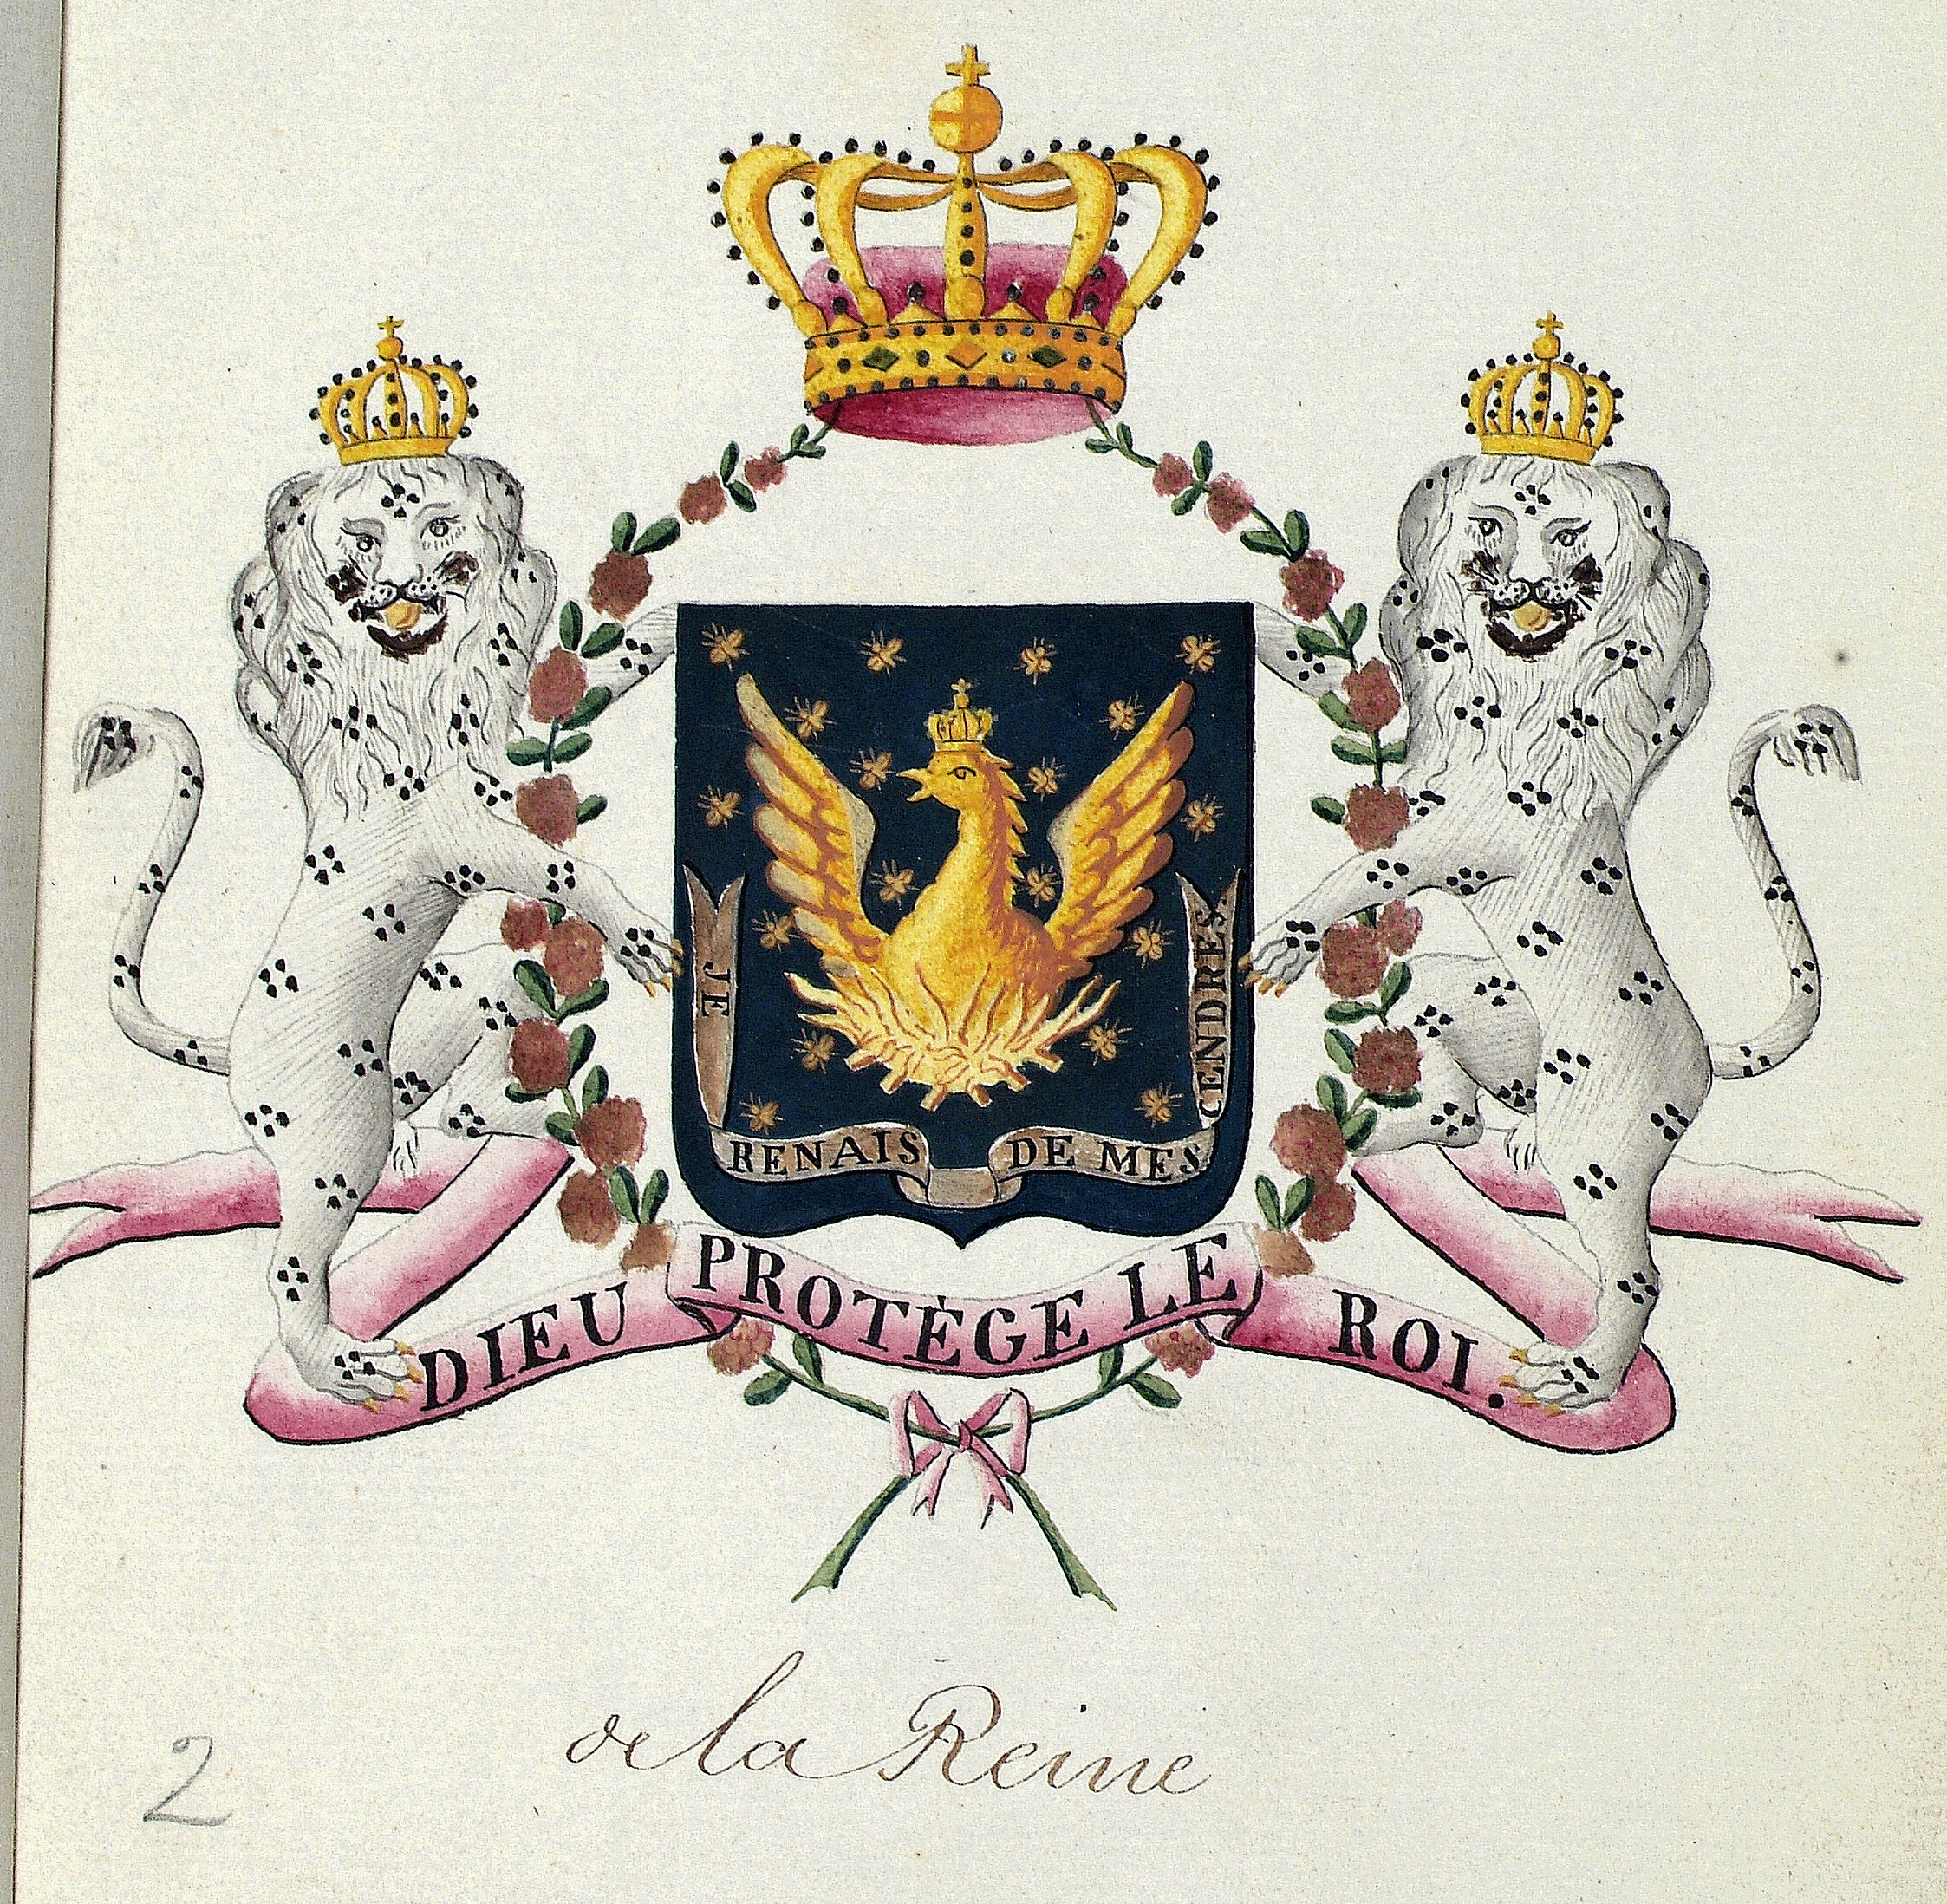 Armes de la Reine, College of Arms MS J.P. 177, Armorial General du Royaume d'Hayti, fol. 2r. Reproduced by permission of the Kings, Heralds and Pursuivants of Arms